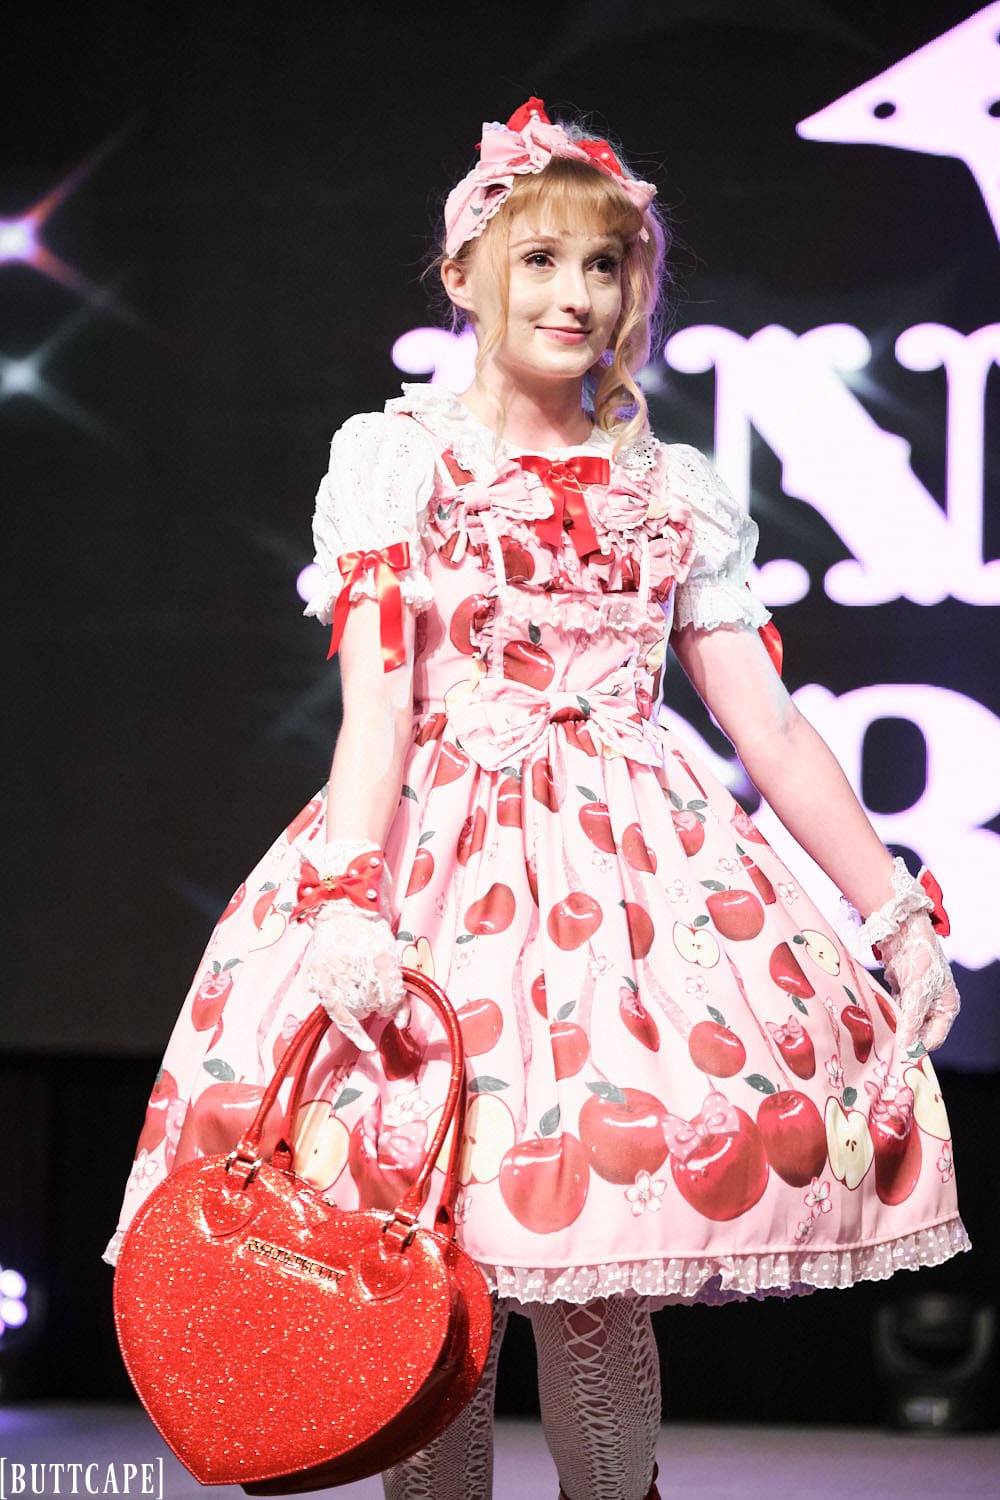 Model 3 wearing pink and red cherry themed lolita outfit holding red heart purse - half body.